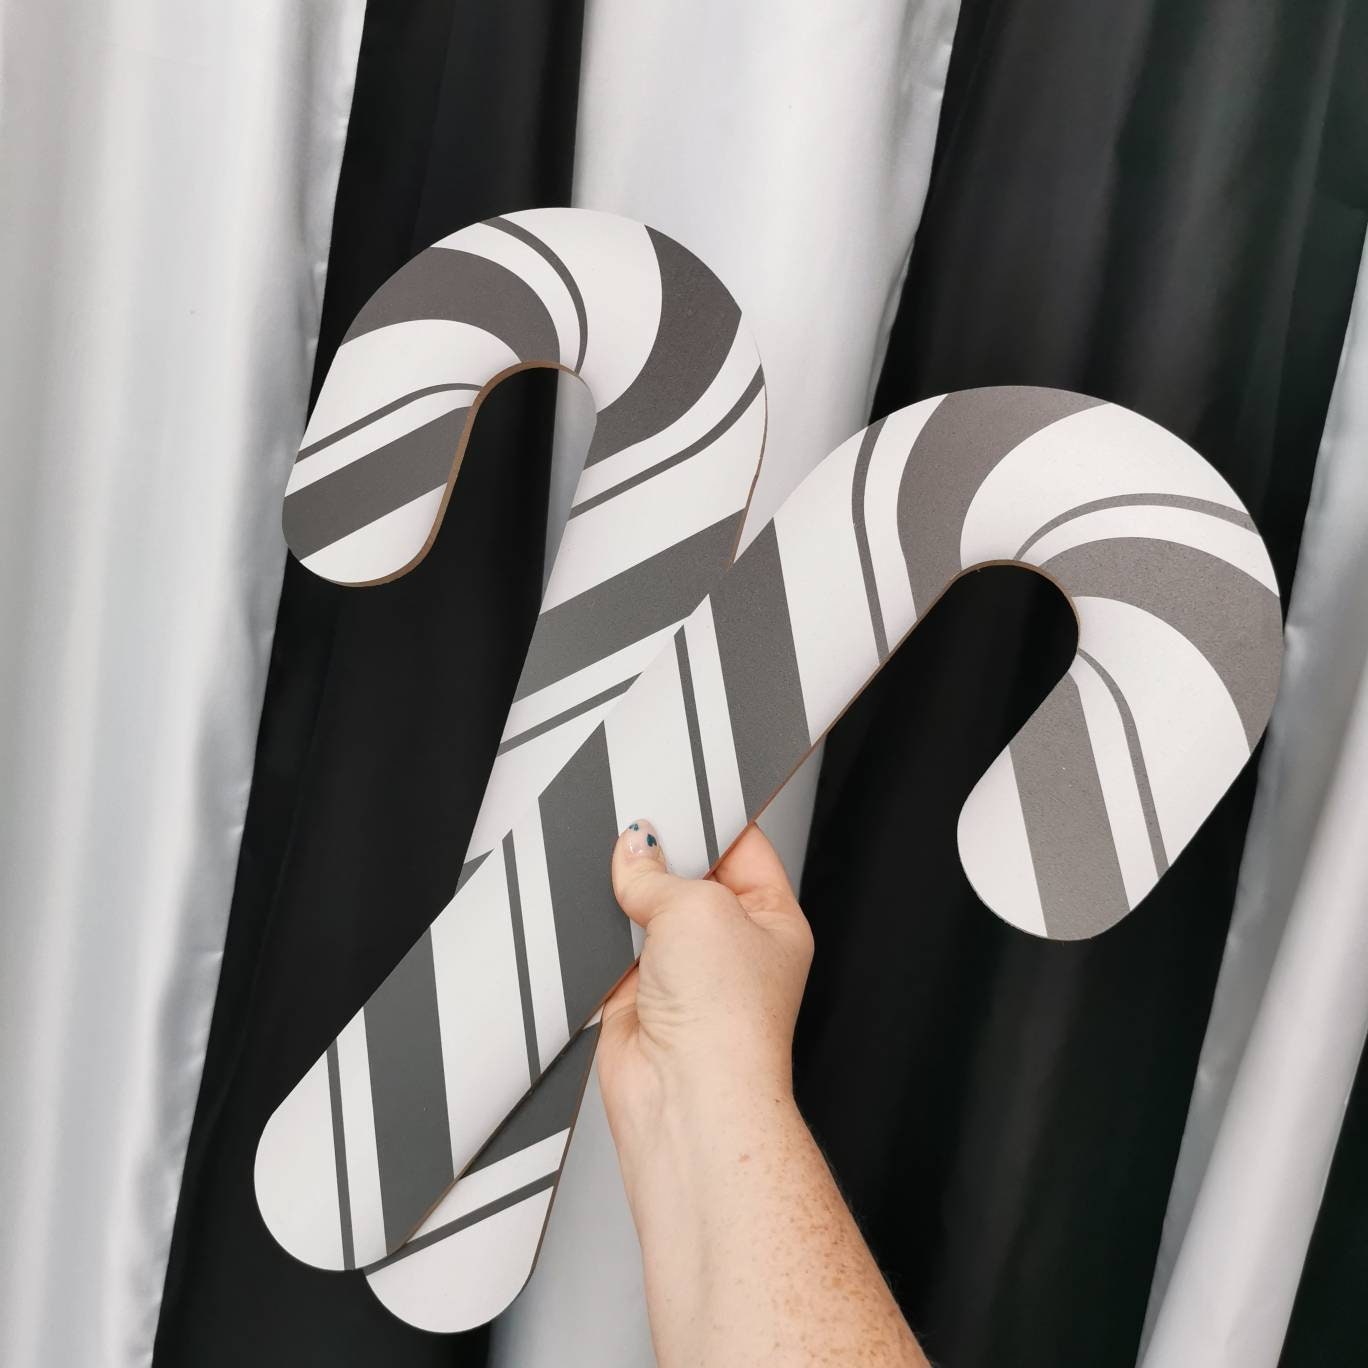 Black & White Candy Cane Prop